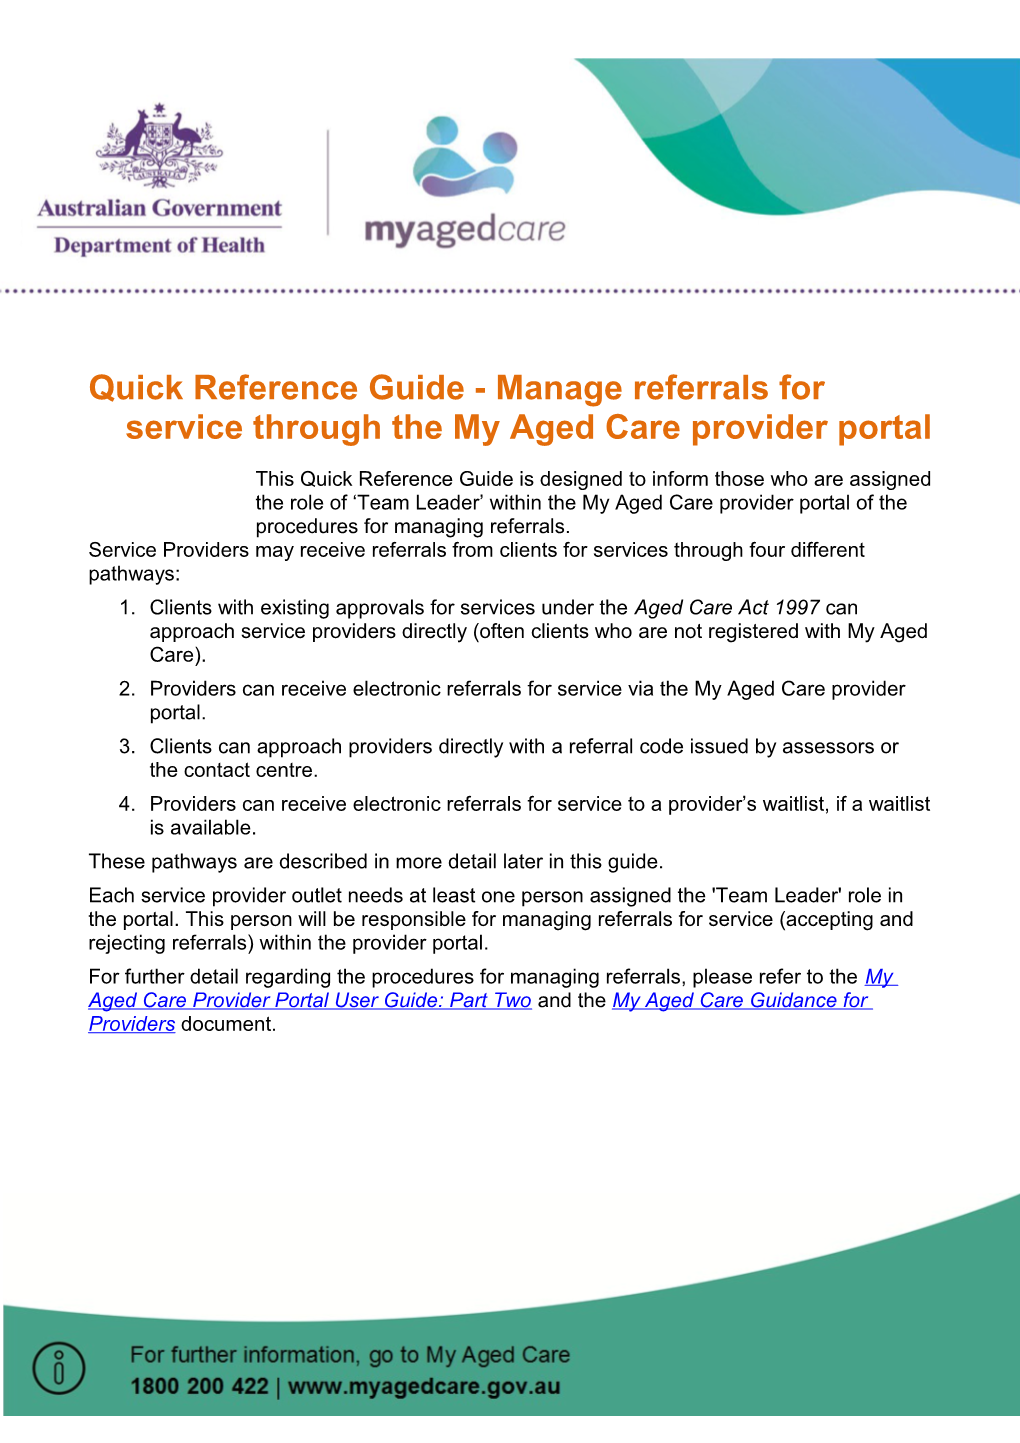 Quick Reference Guide - Managereferrals for Service Through the My Aged Care Provider Portal